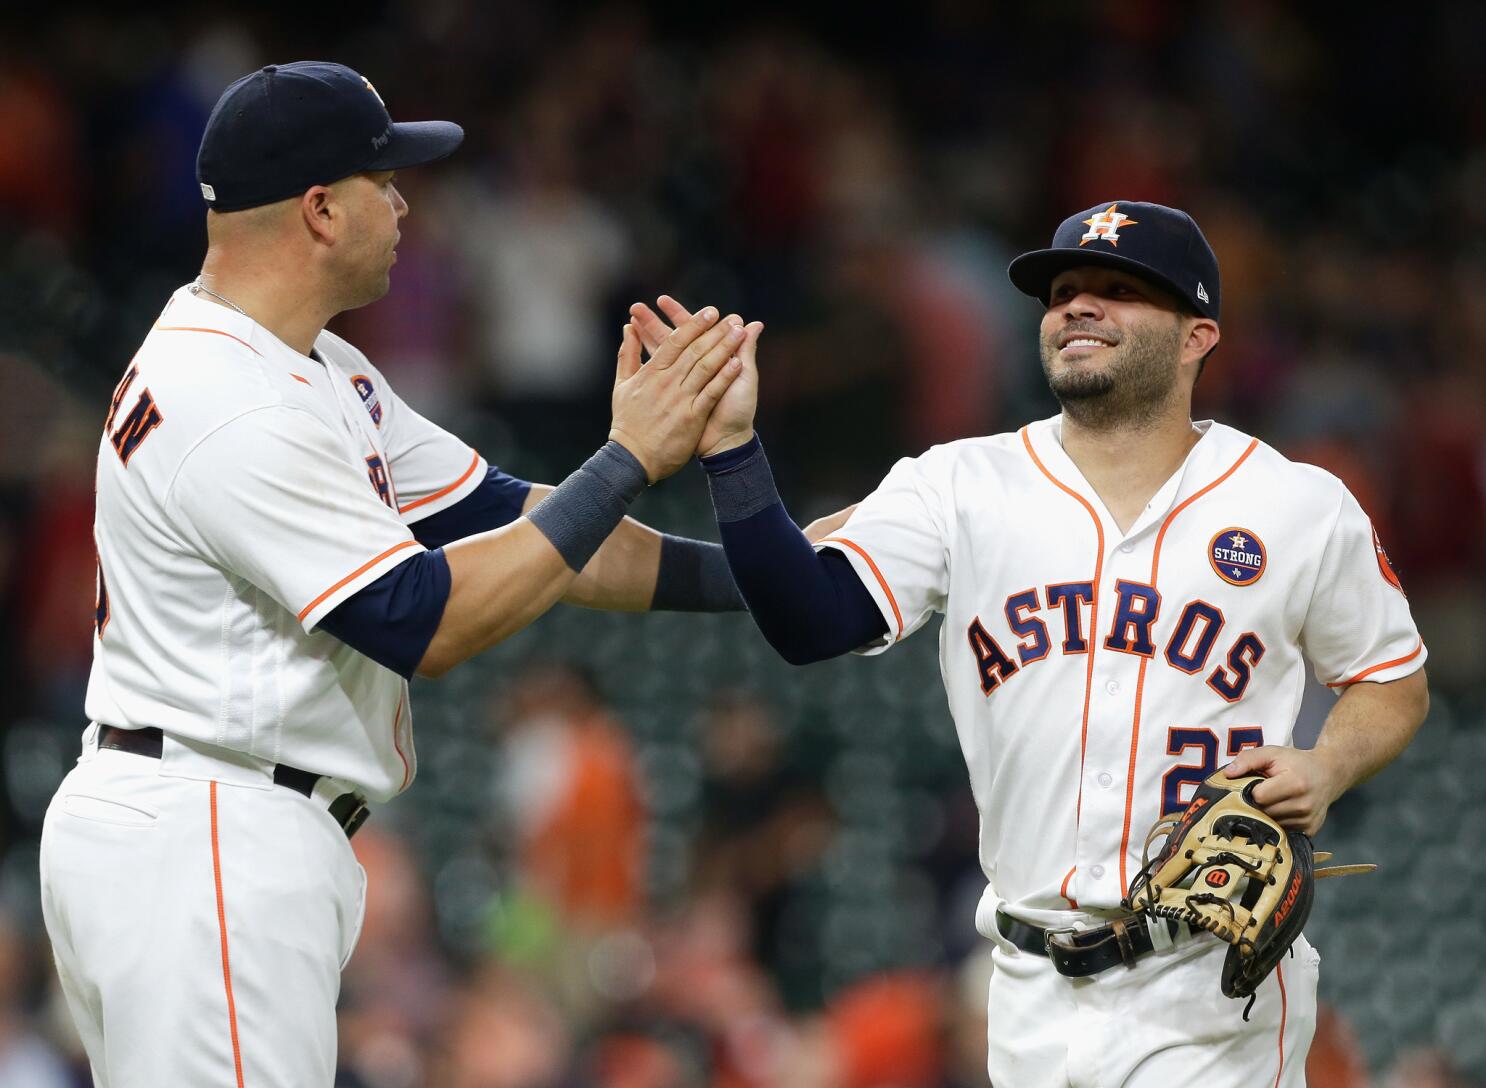 How Astros' 5-6 Altuve rose to height of his profession